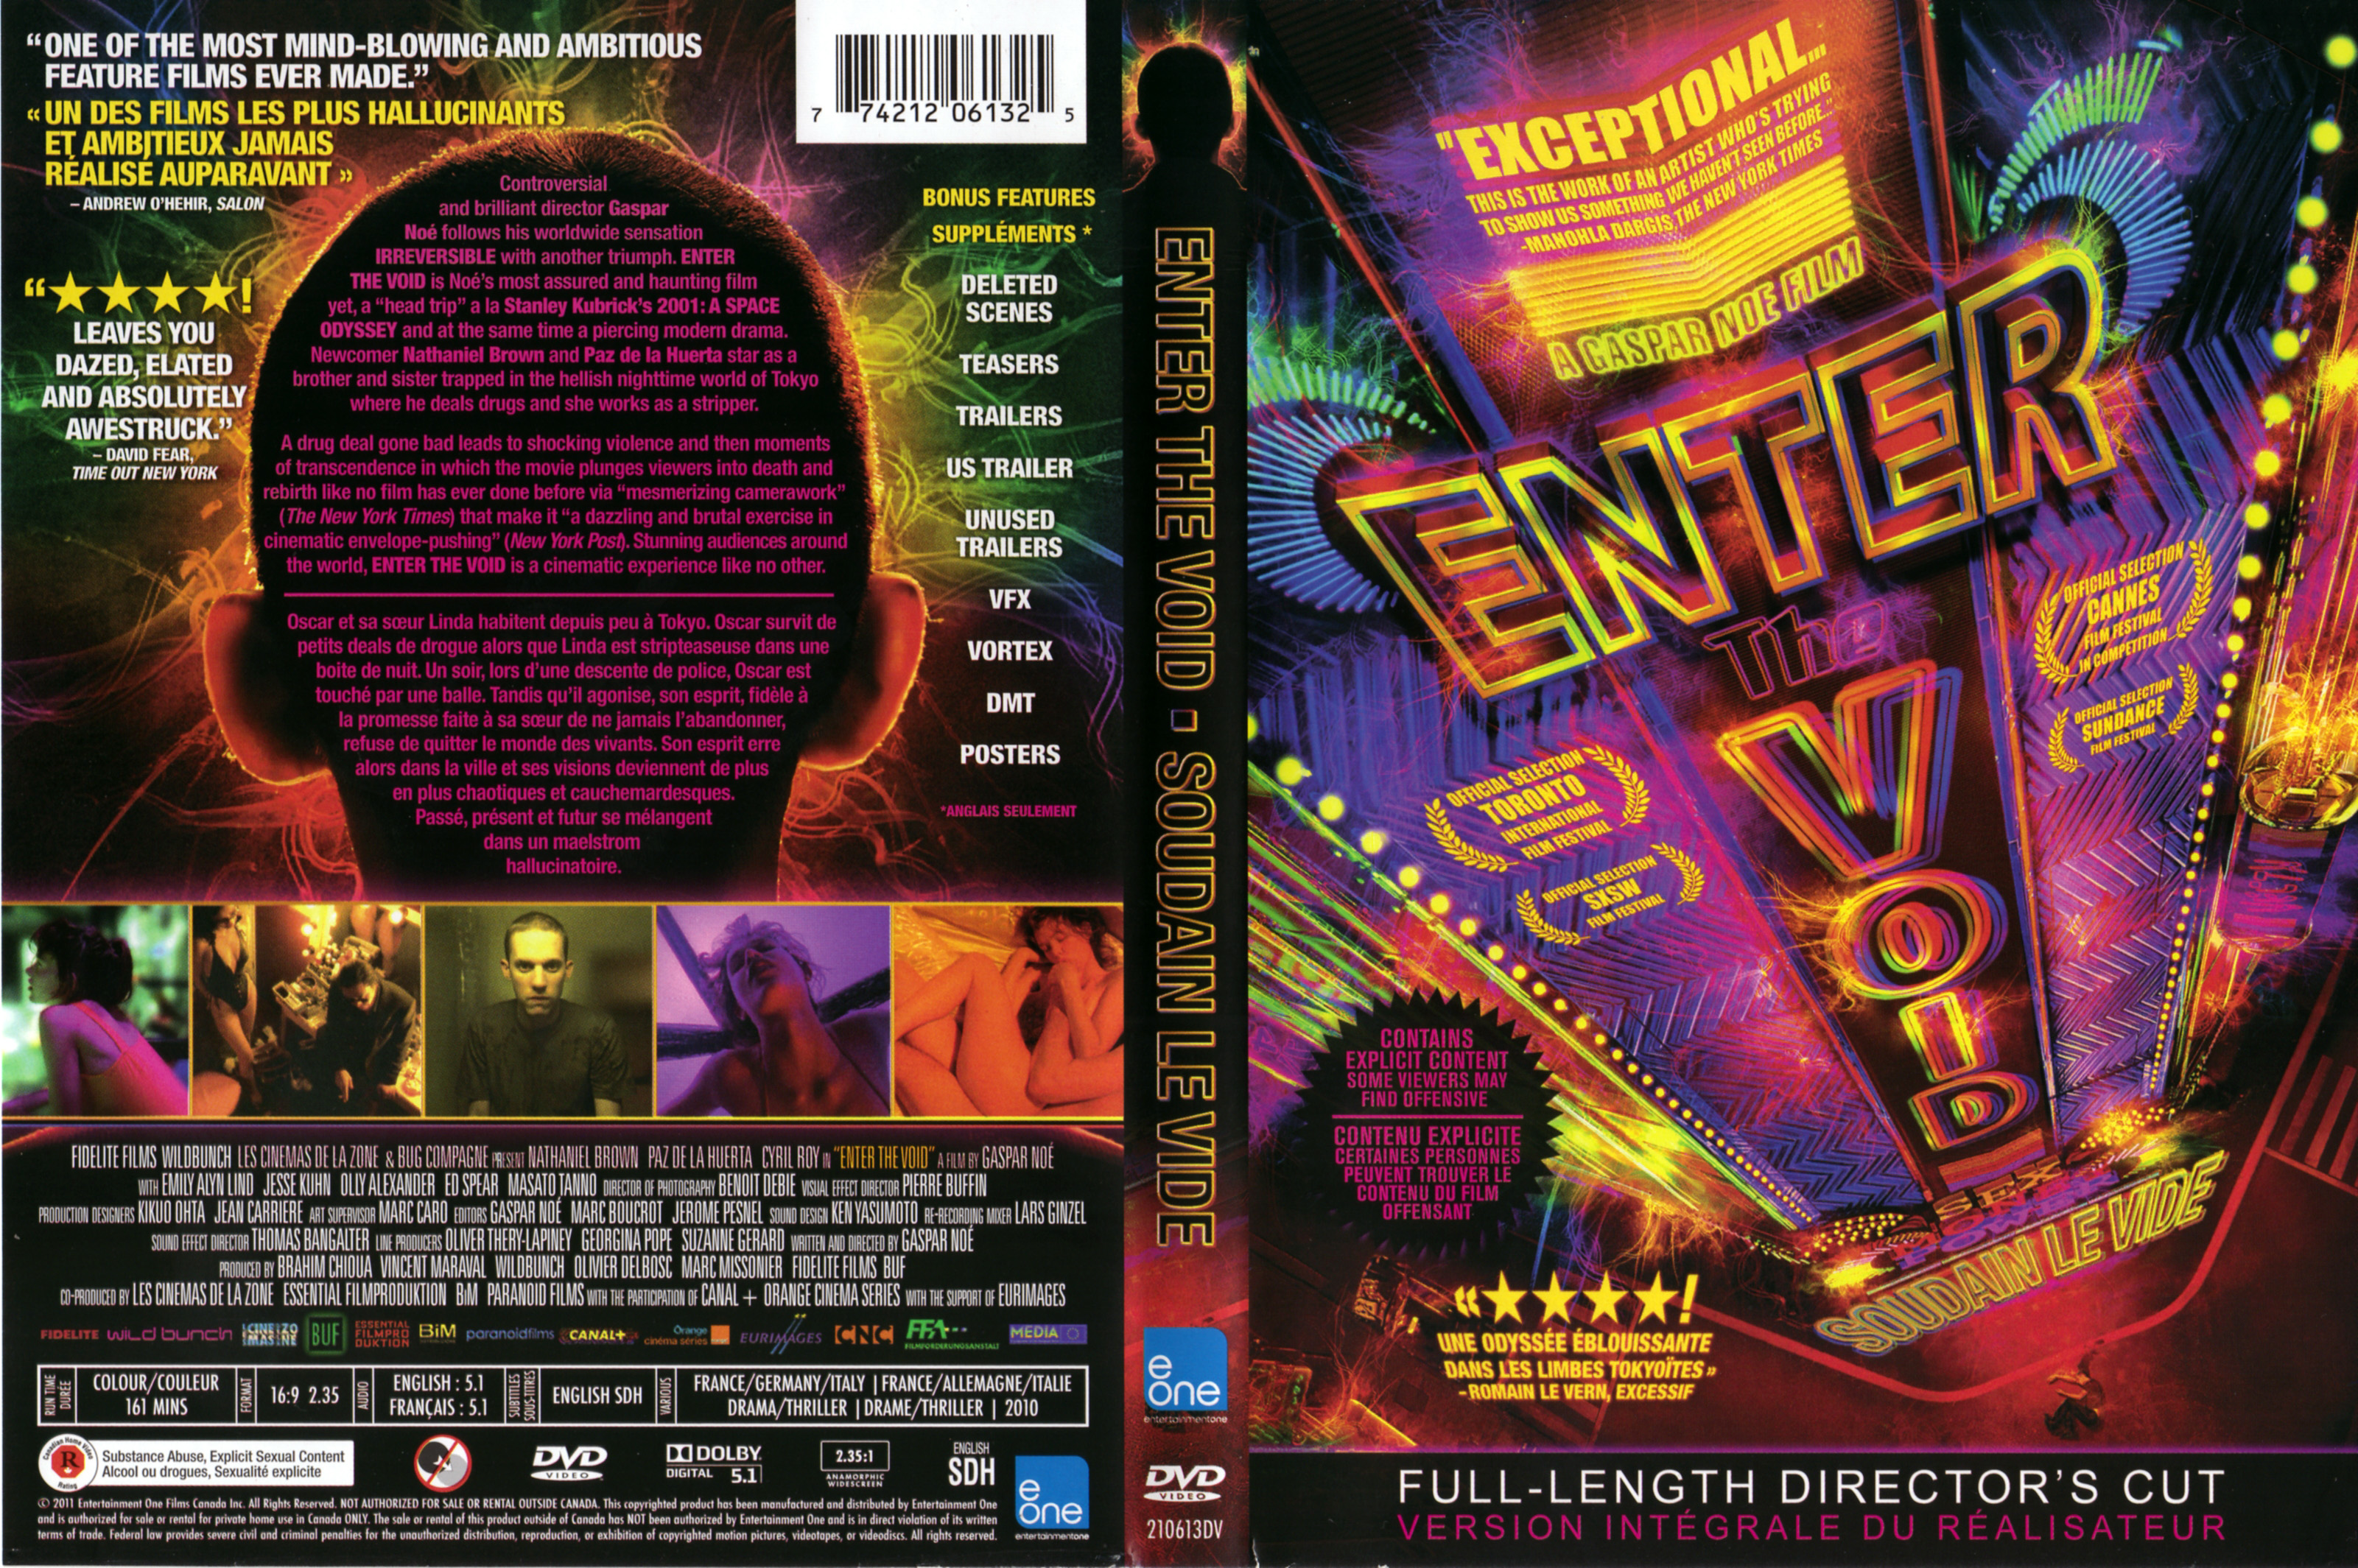 Jaquette DVD Enter the coid (Canadienne)